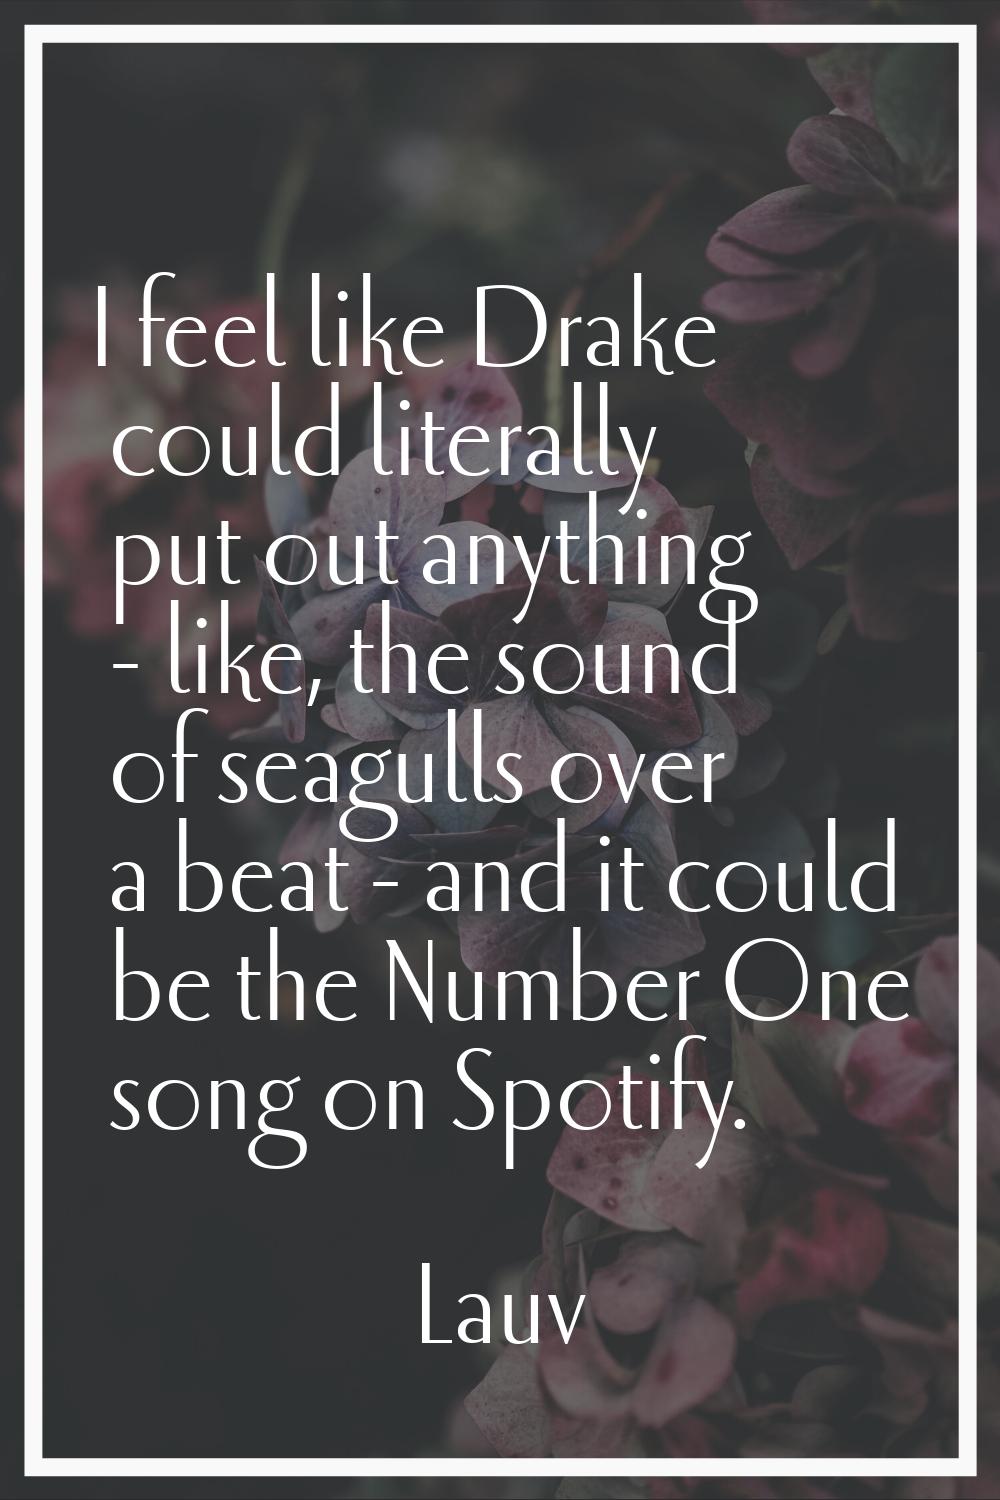 I feel like Drake could literally put out anything - like, the sound of seagulls over a beat - and 